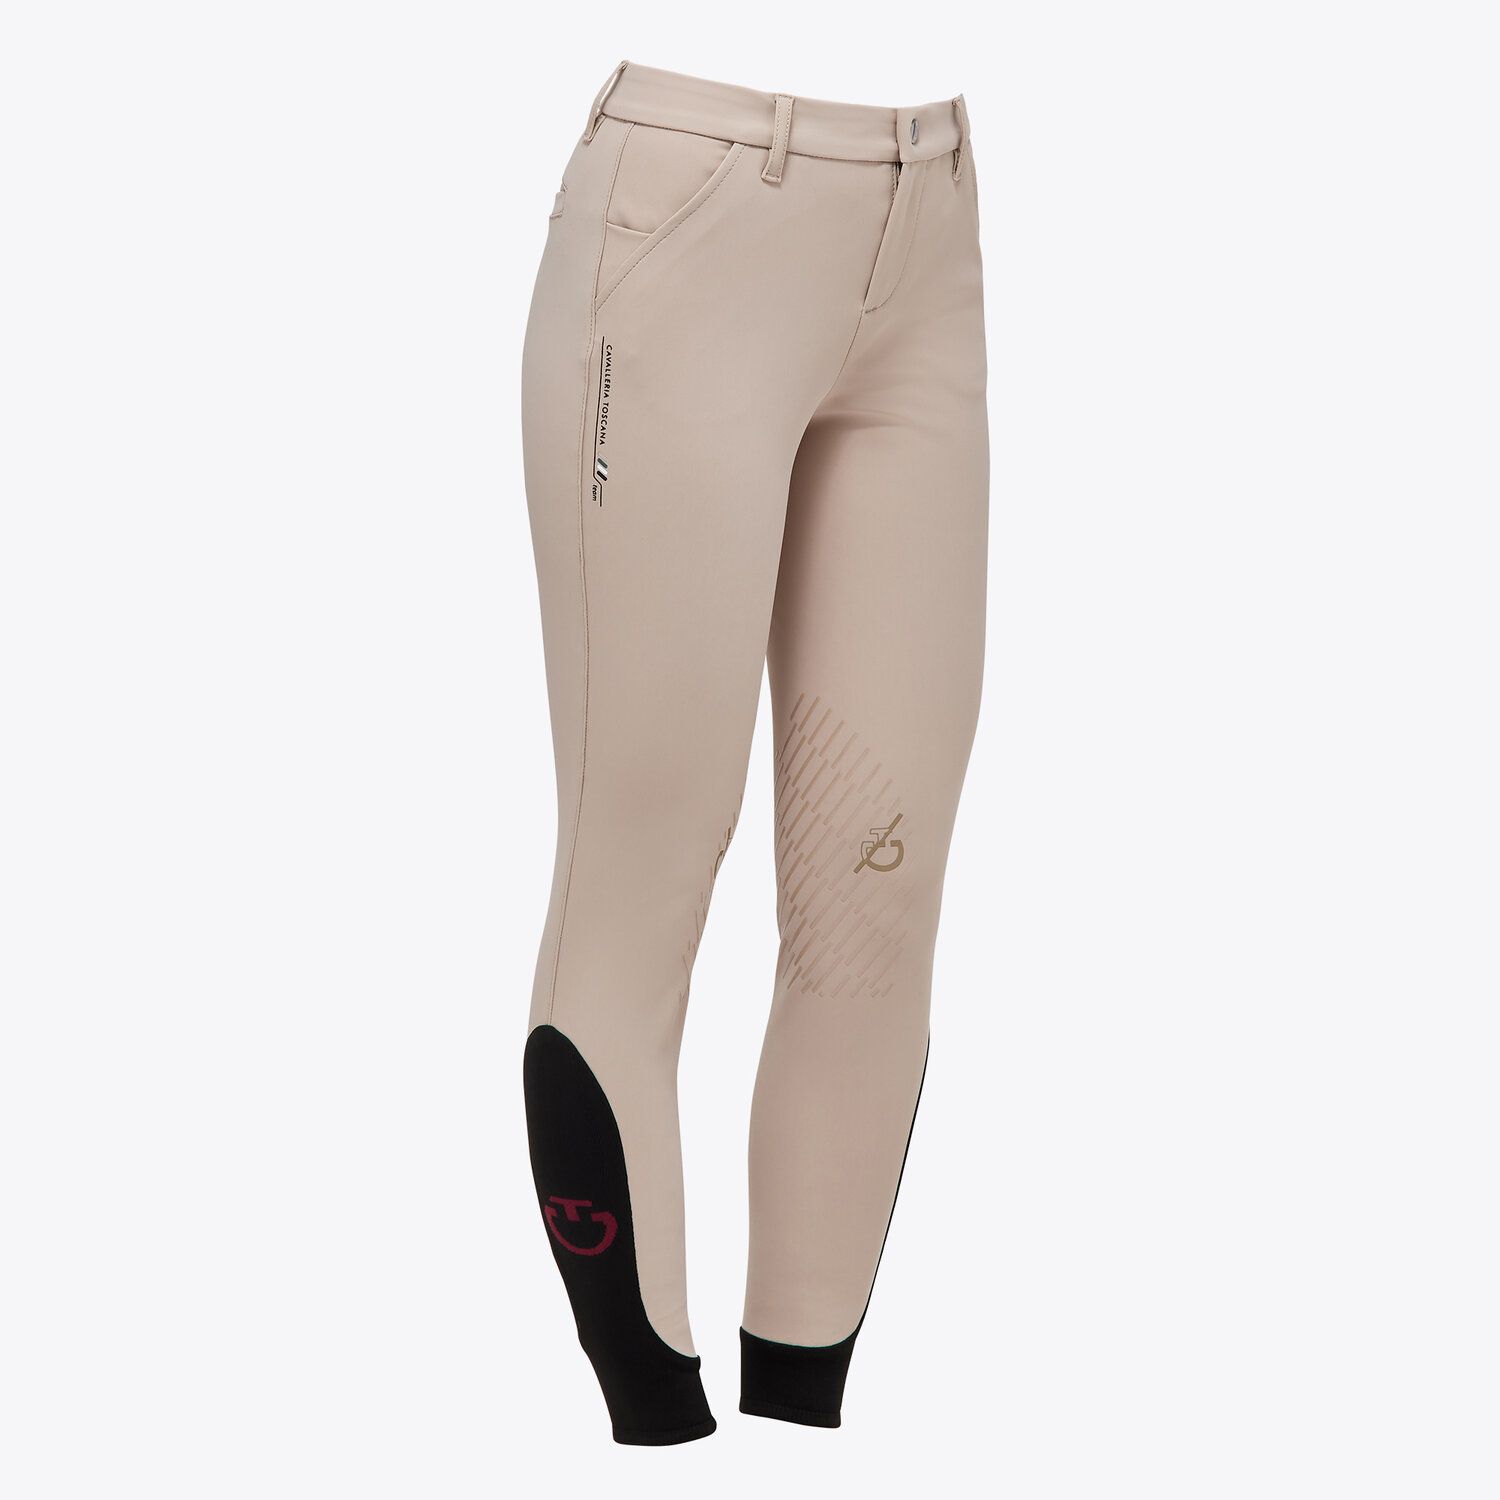 Cavalleria Toscana Girls’ riding breeches in four-way stretch technical fabric BEIGE-2